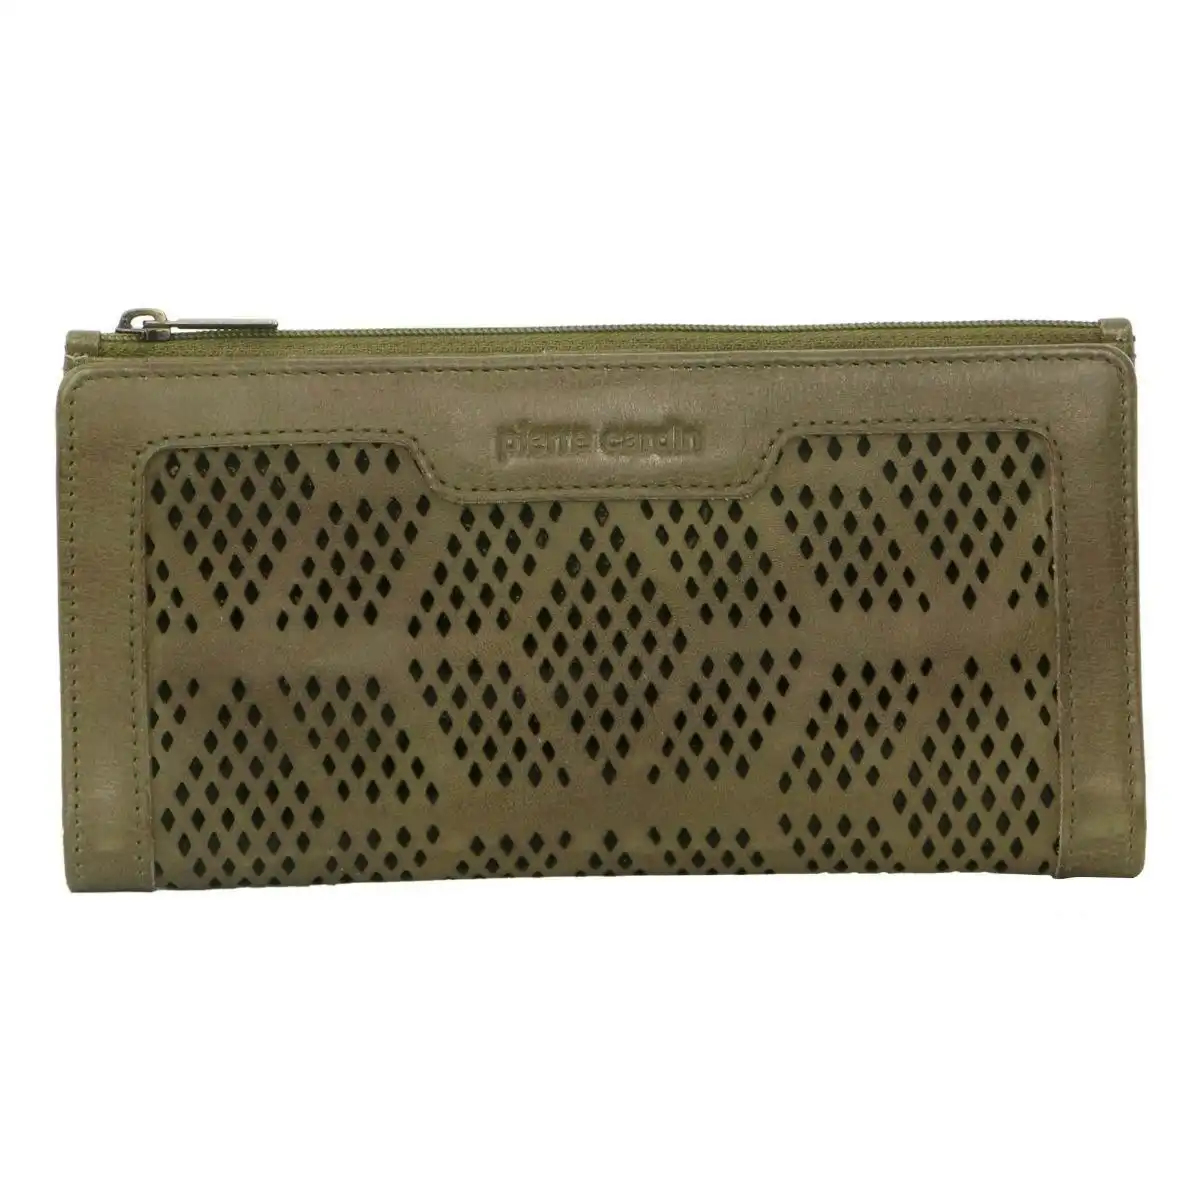 Pierre Cardin Perforated Leather Ladies Handy Travel Wallet - Olive